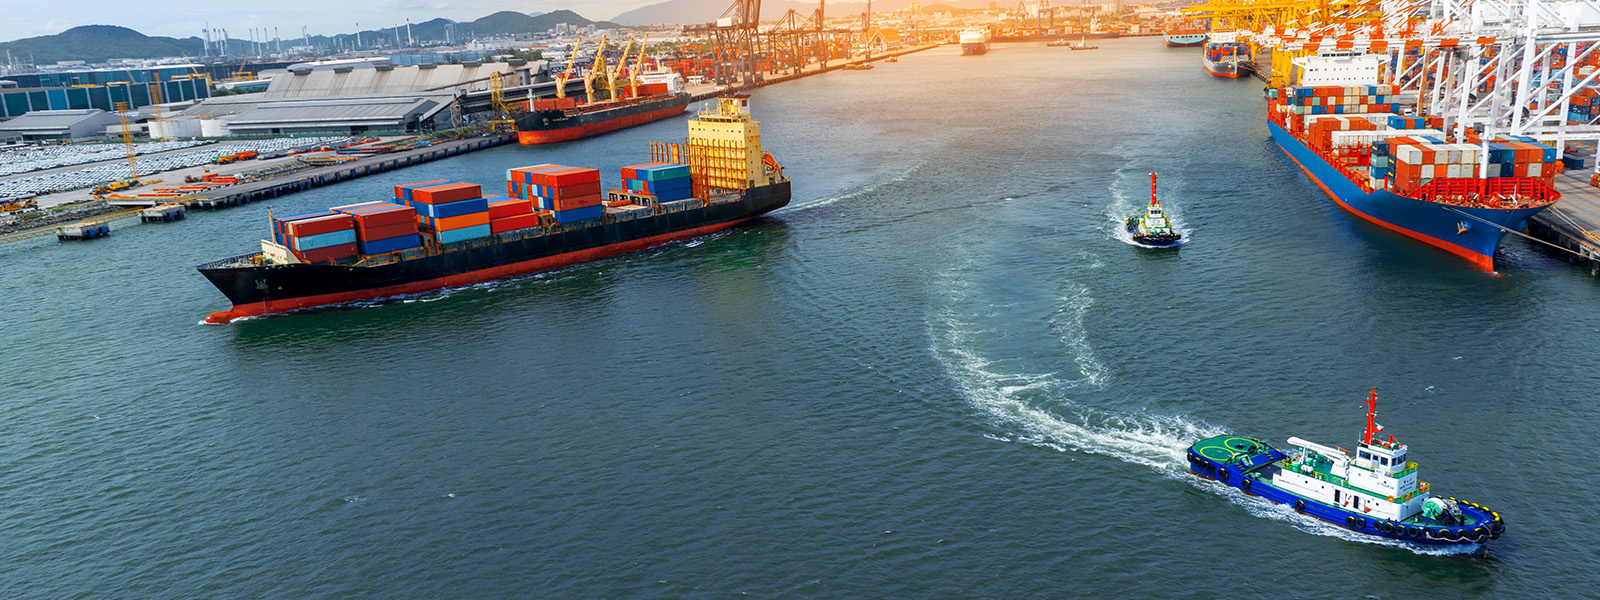 Wk25 // Safeguard Your Business: The Essential Guide to Inland Marine Insurance